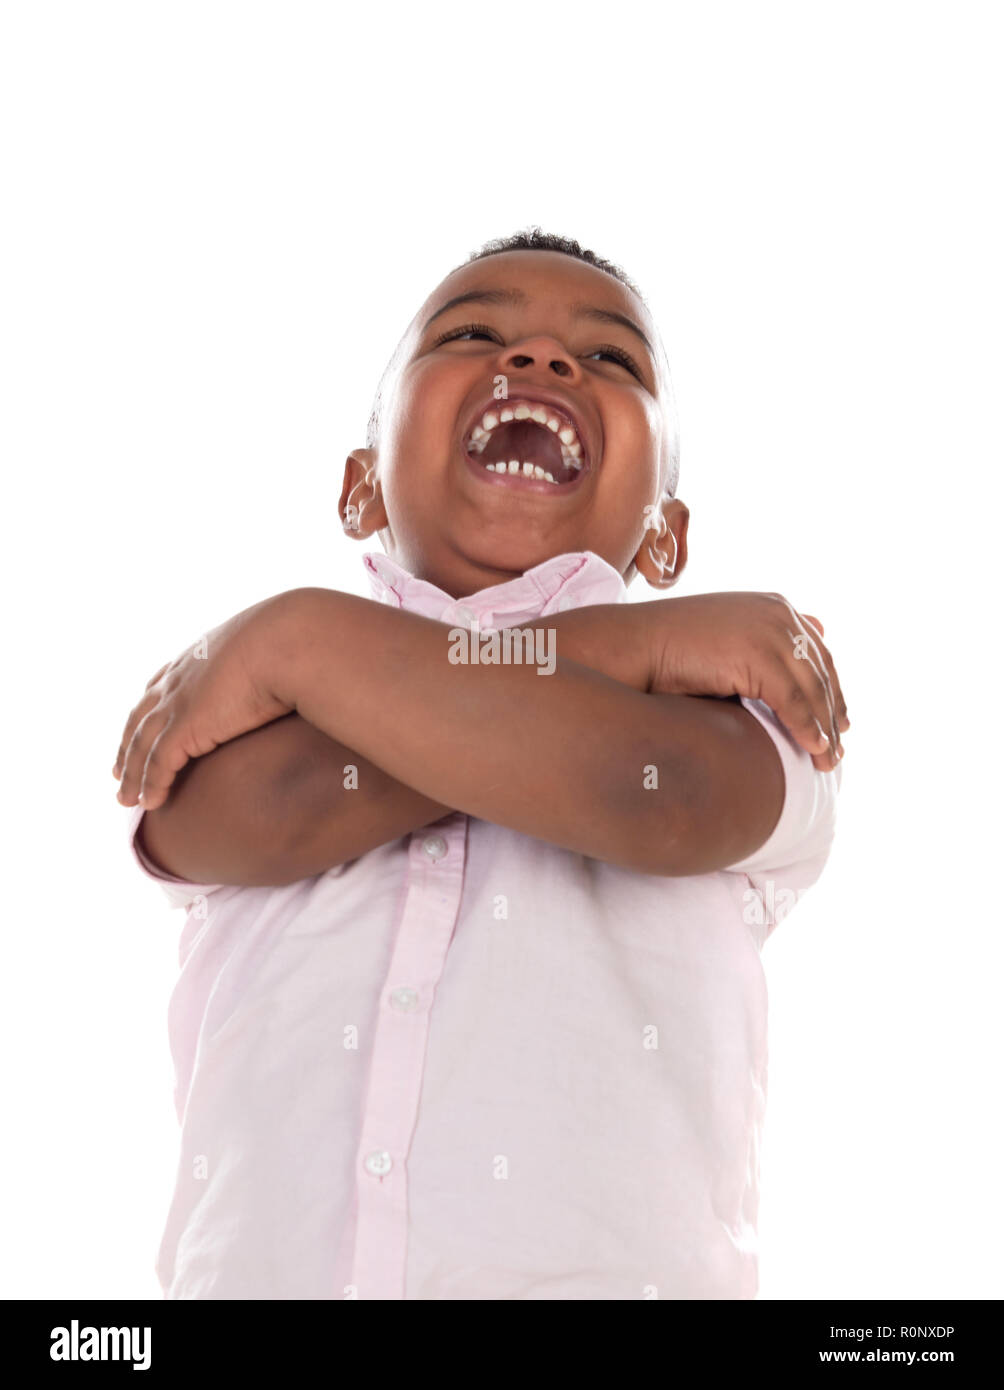 Happy latin laughing child isolated on a white background Stock Photo